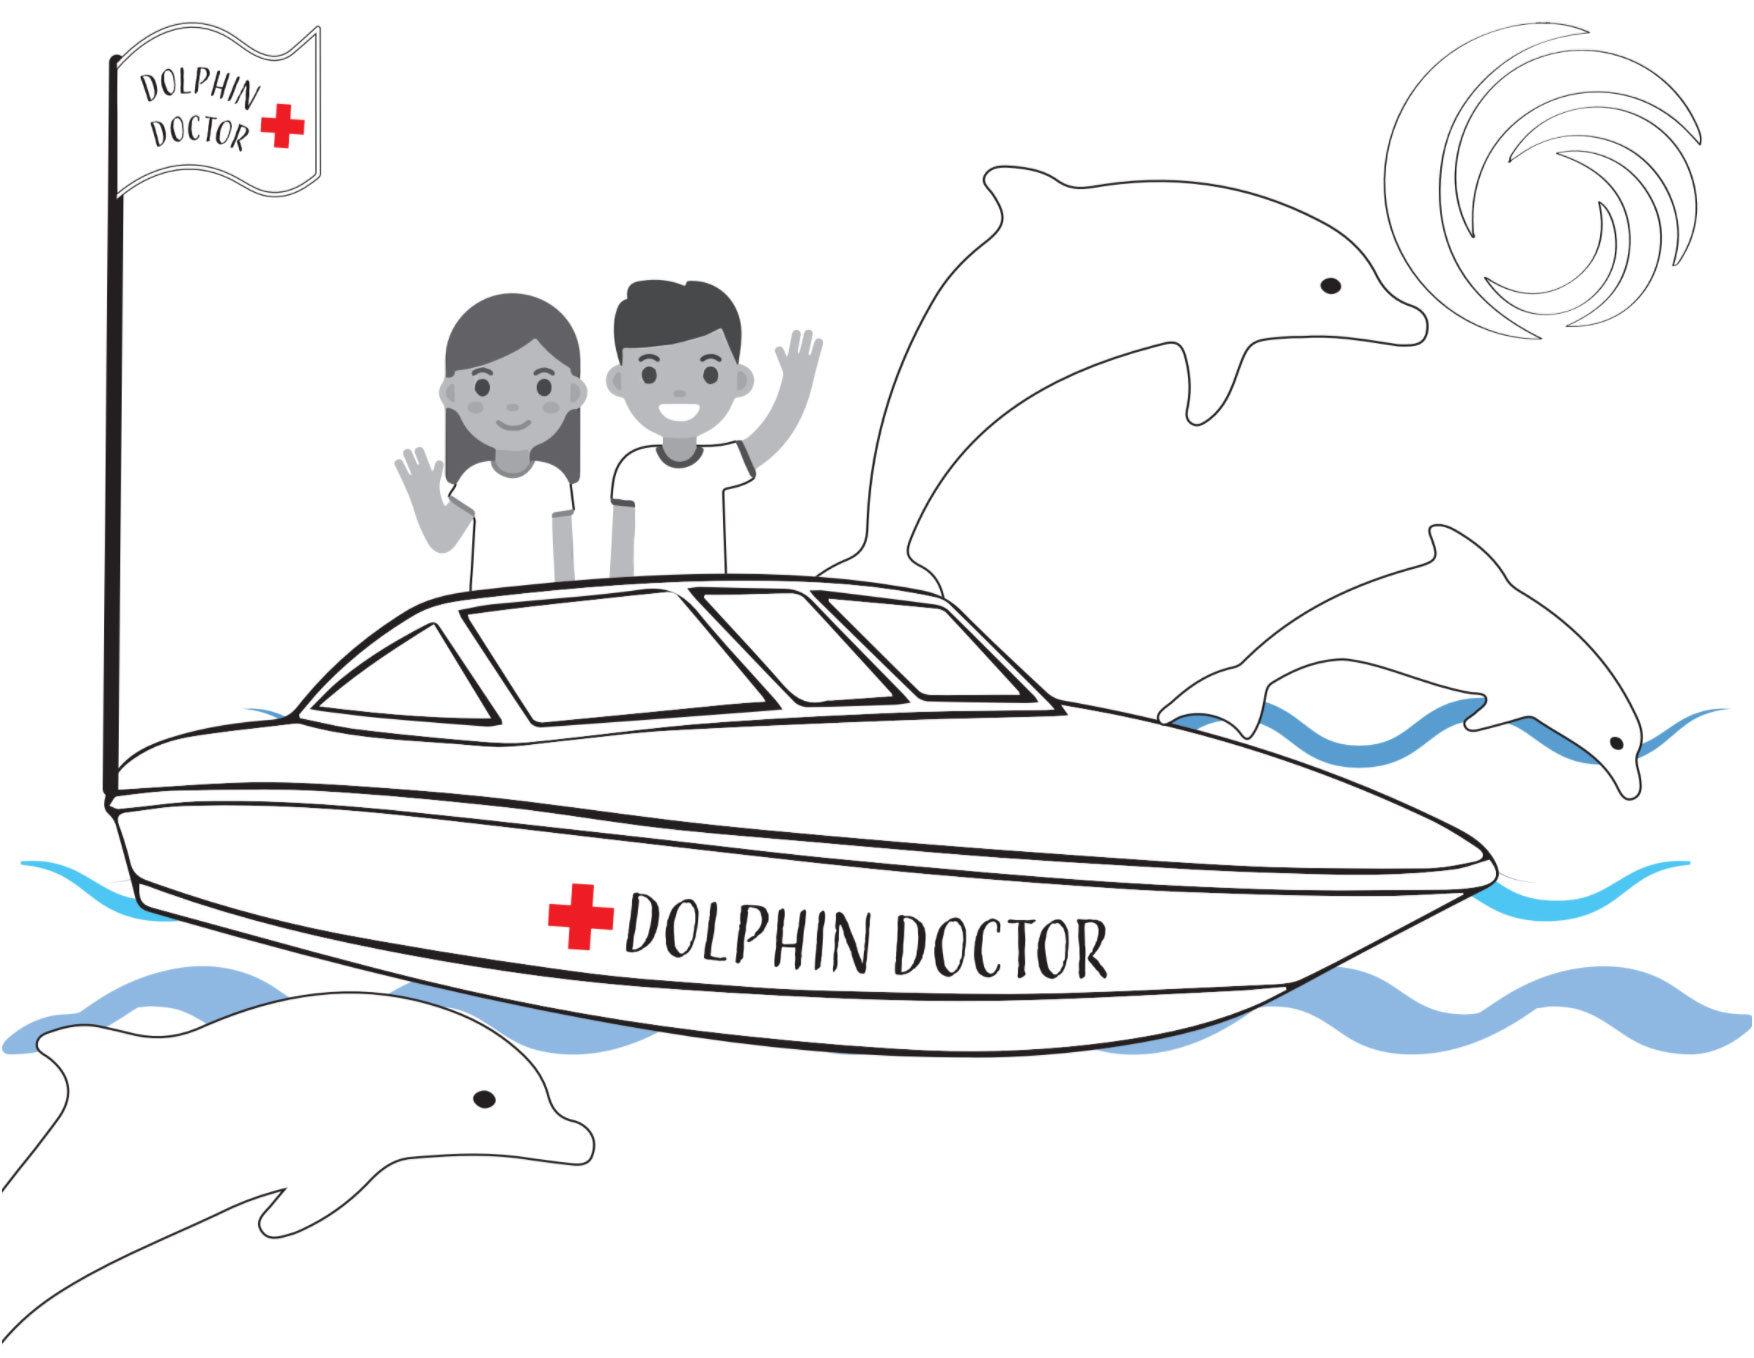 Dolphin Doctor Coloring Page - Ocean Ambassadors